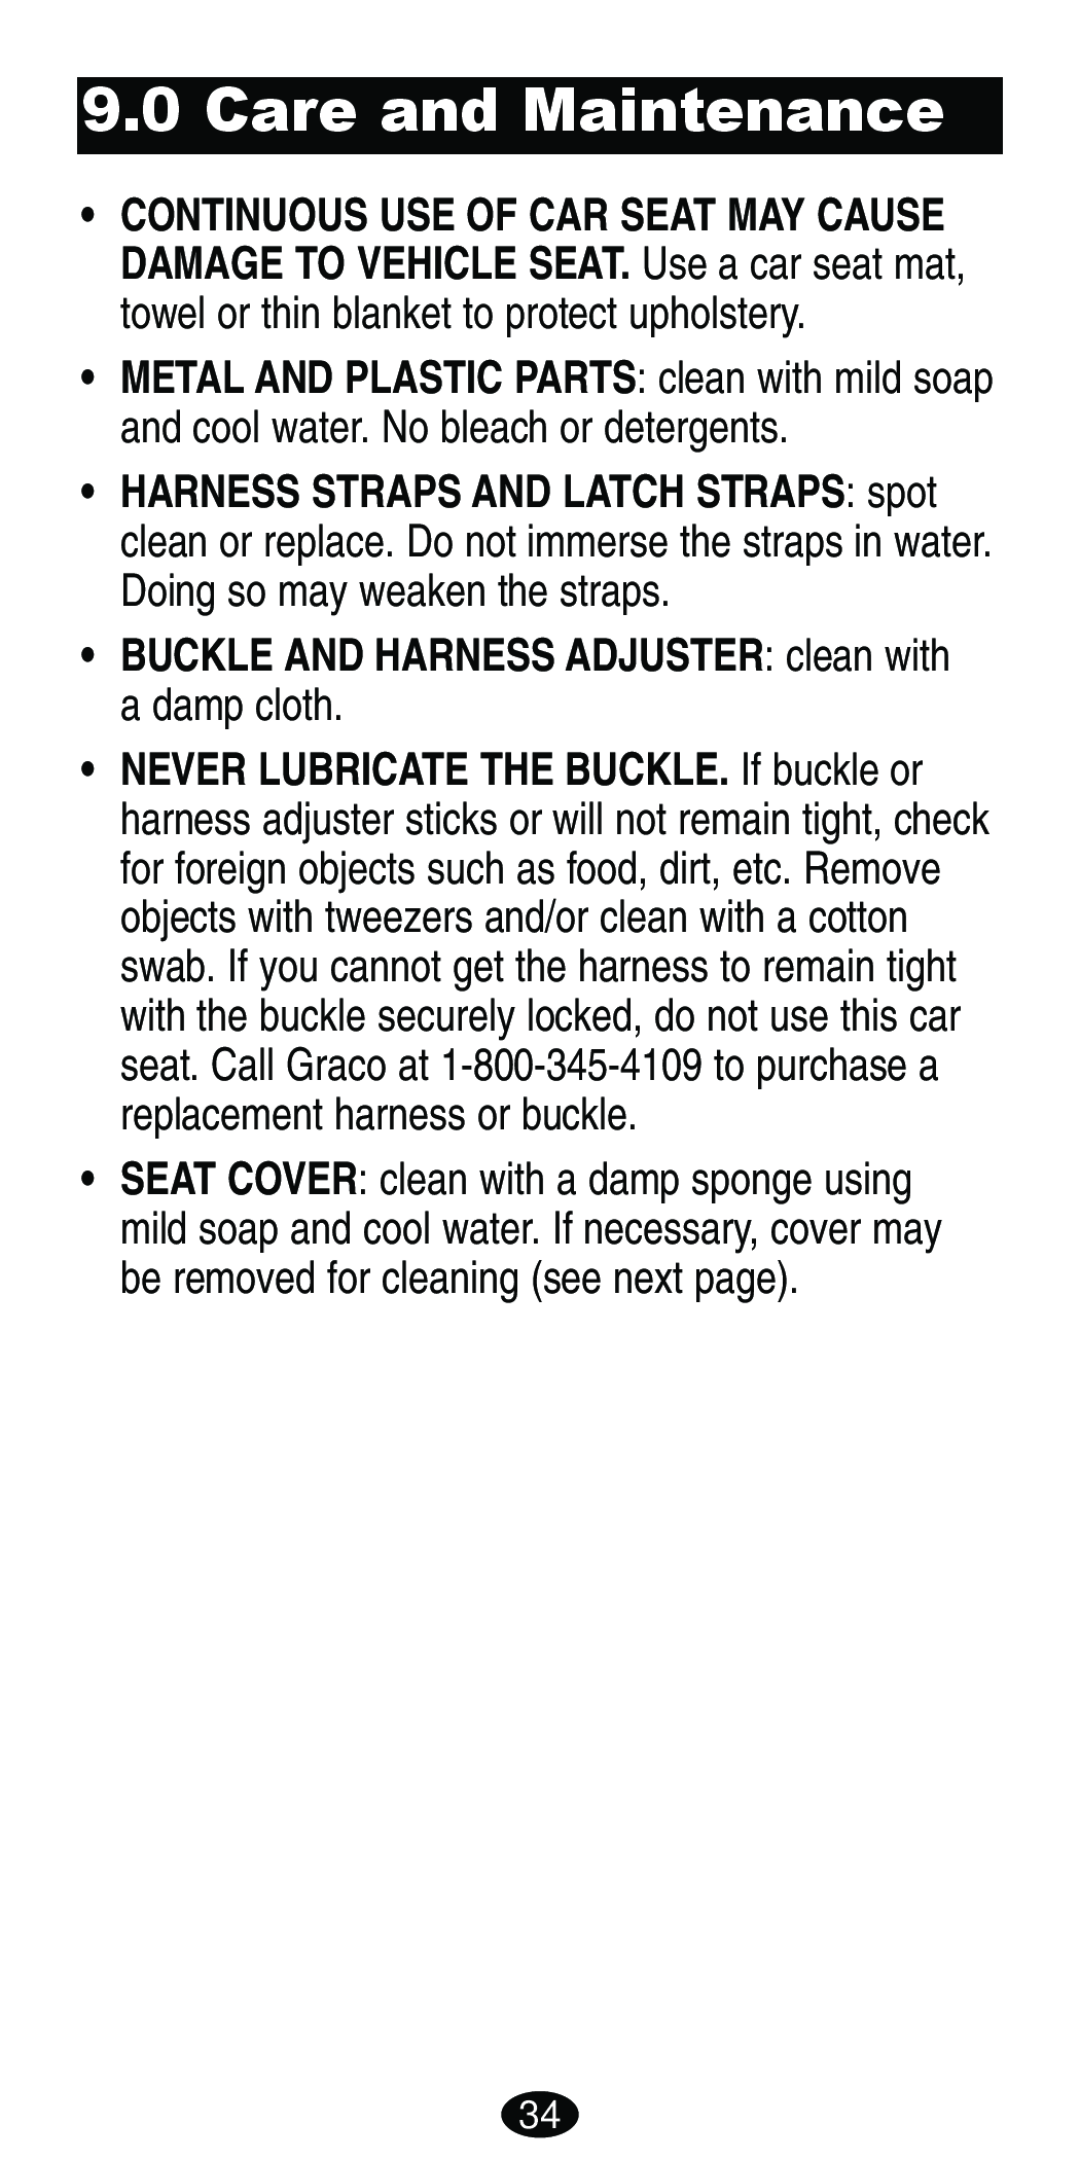 Graco Car Seat/Booster manual Care and Maintenance, BUCKLE AND HARNESS ADJUSTER clean with a damp cloth 